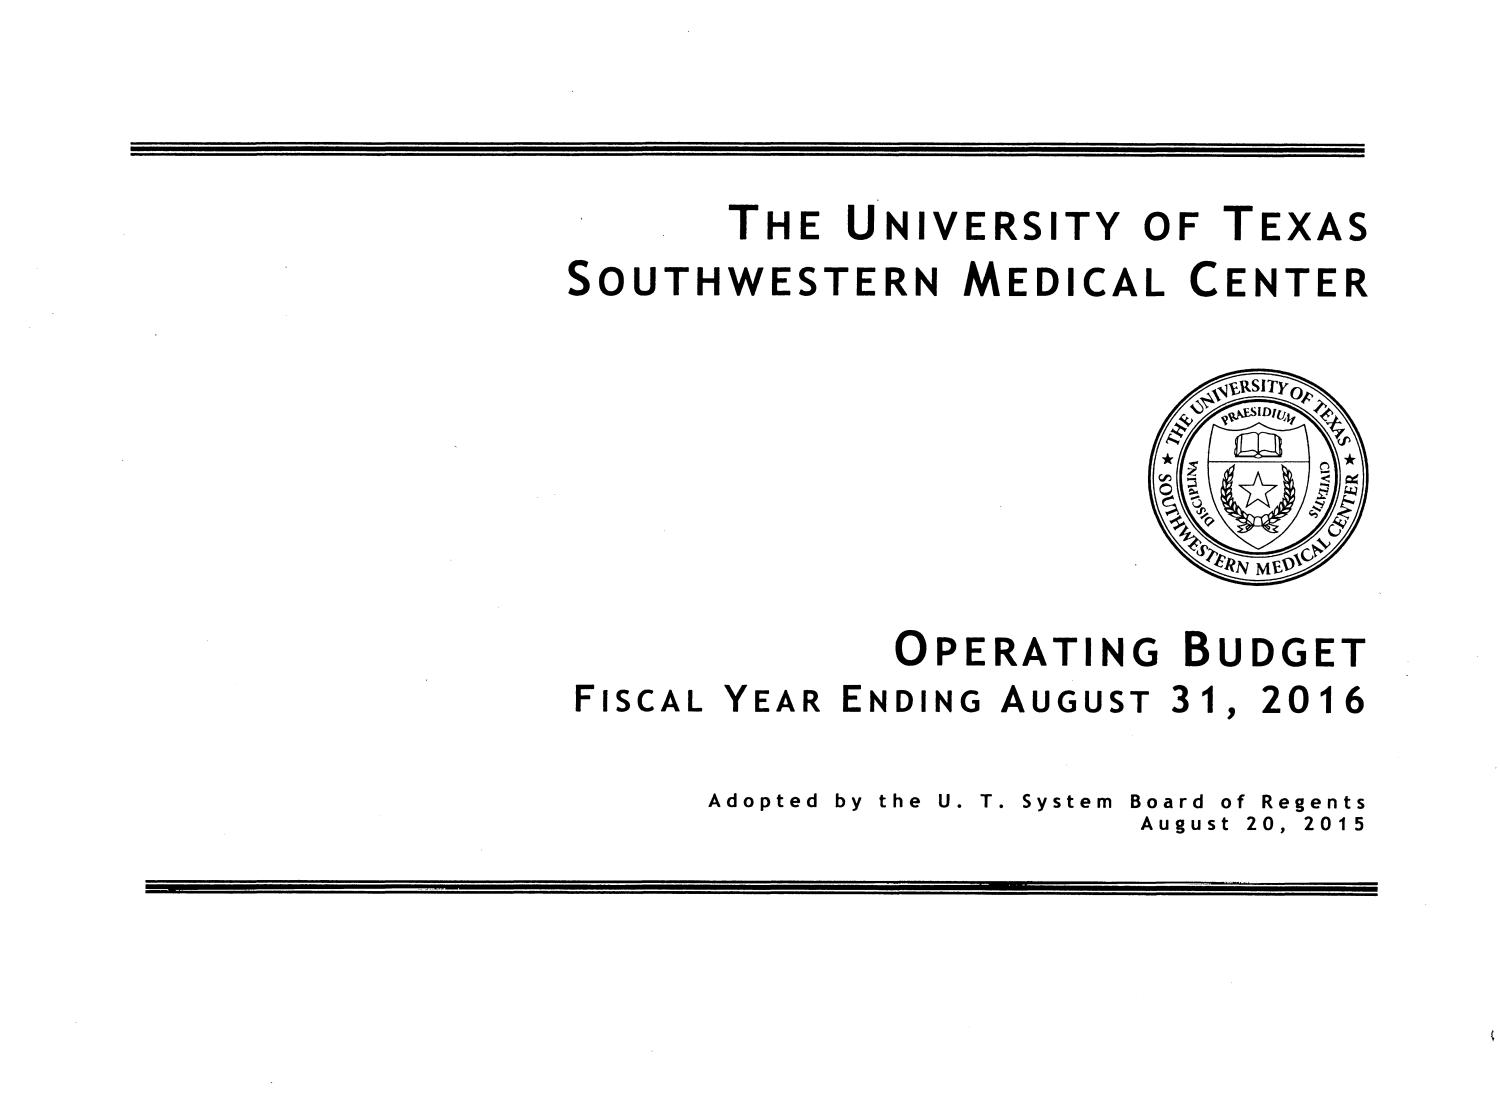 University of Texas Southwestern Medical Center Operating Budget: 2016
                                                
                                                    Title Page
                                                